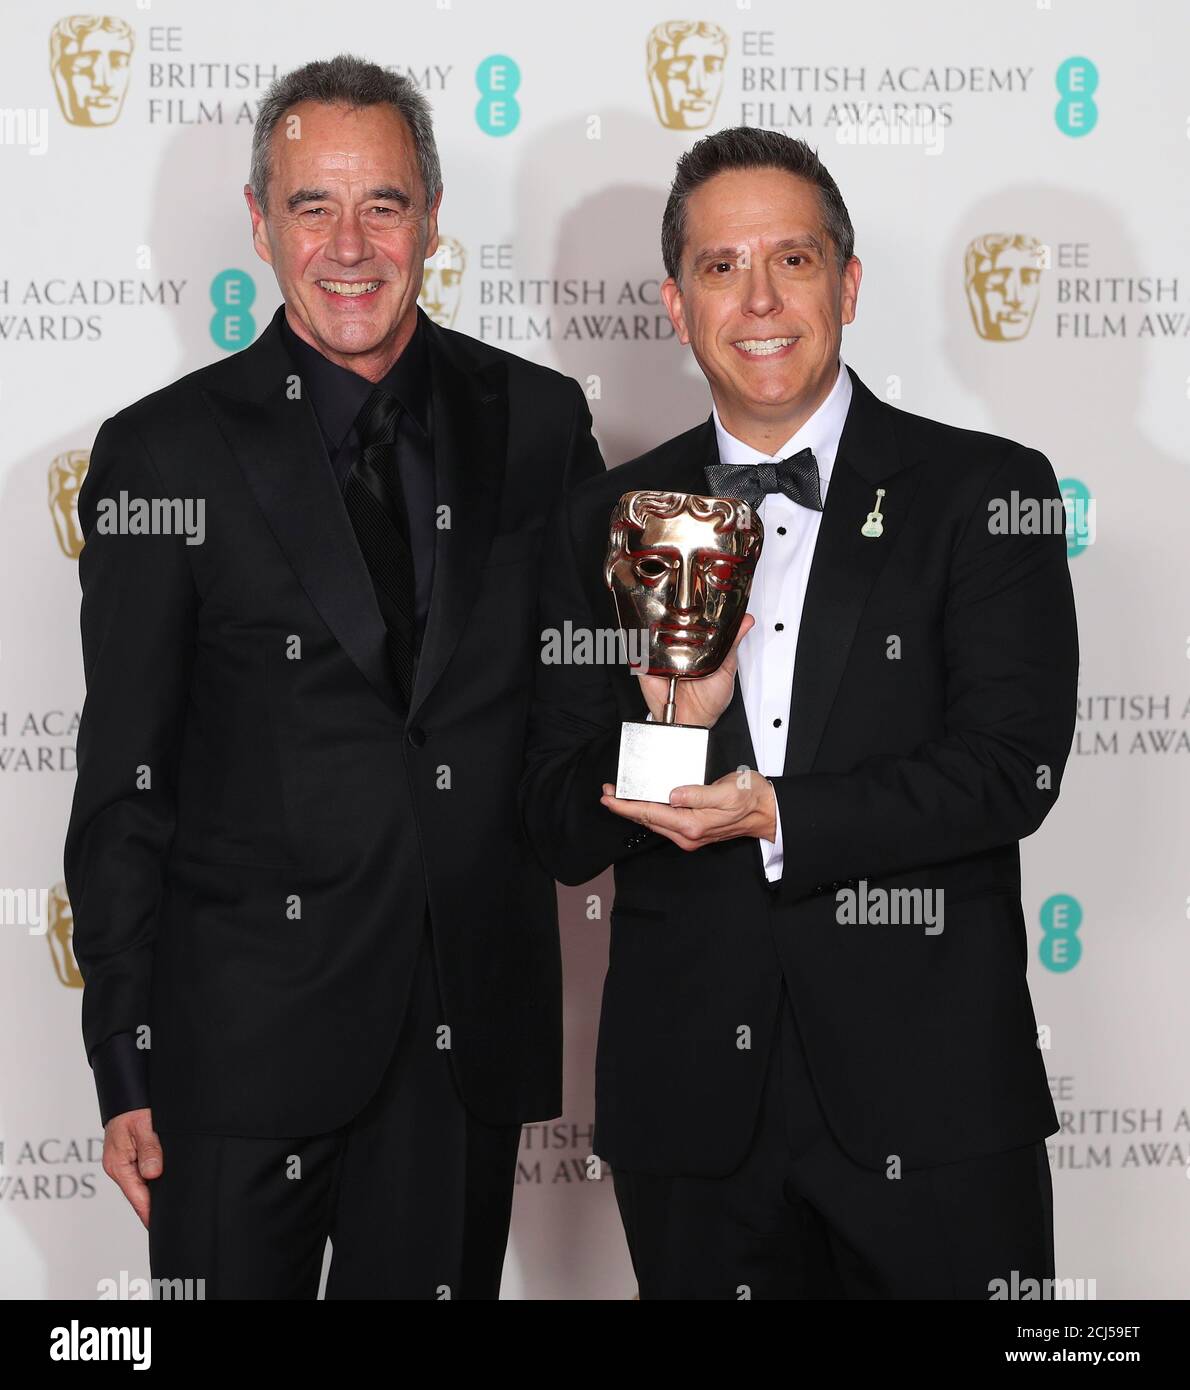 Jim Morris and Lee Unkrich, hold their awards for Best Animated Film award  for 'Coco' at the British Academy of Film and Television Awards (BAFTA) at  the Royal Albert Hall in London,